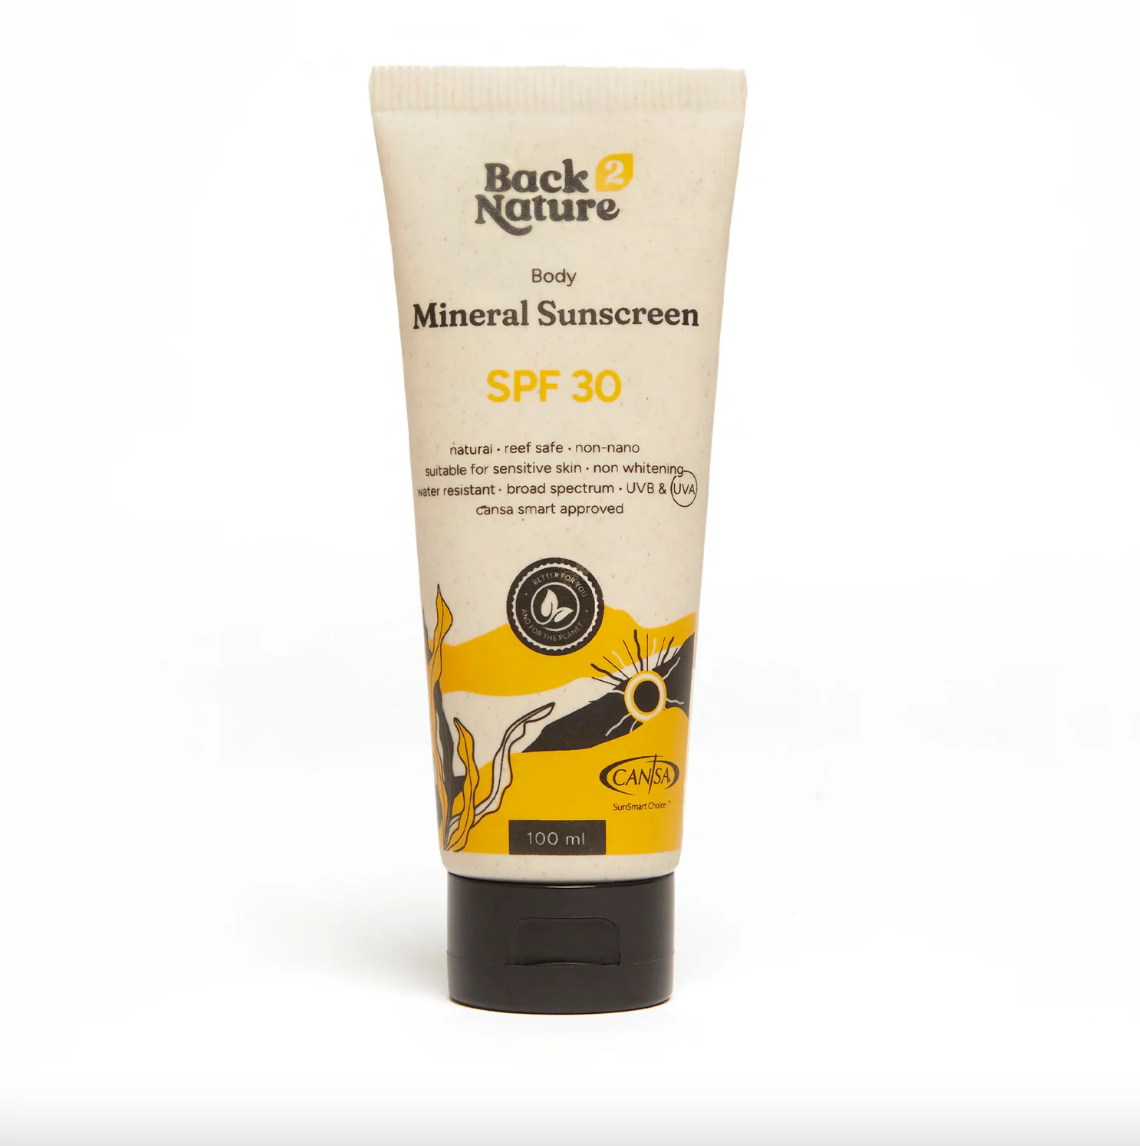 Back2Nature Body Mineral Sunscreen